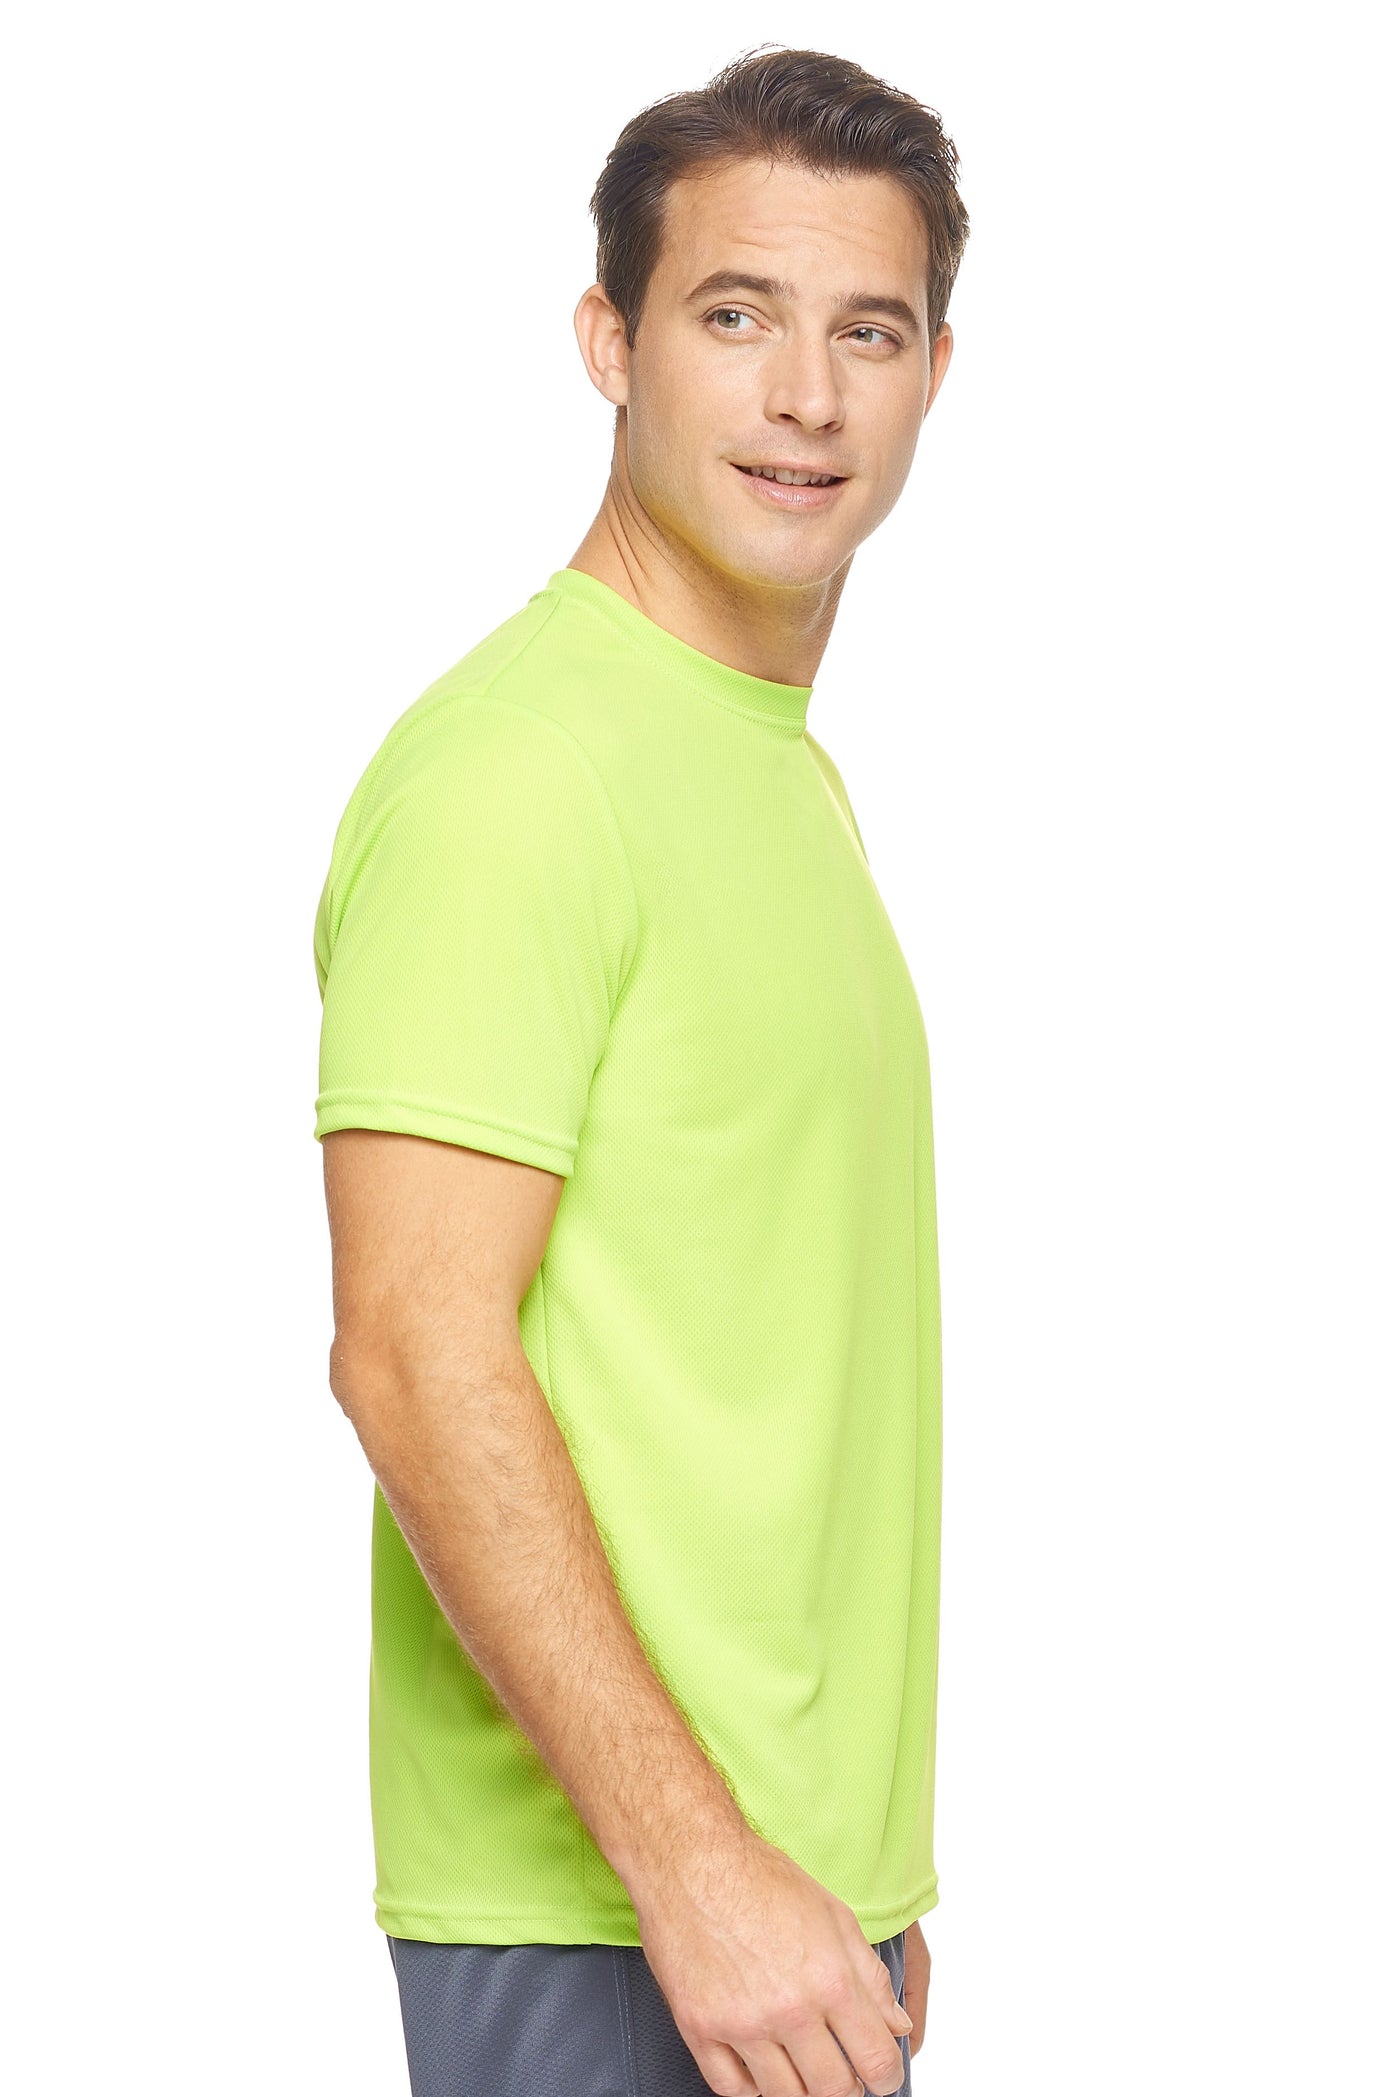 Expert Brand Retail Sportswear Men's Oxymesh Tec Tee Made in USA activewear Key Lime 2#color_key-lime